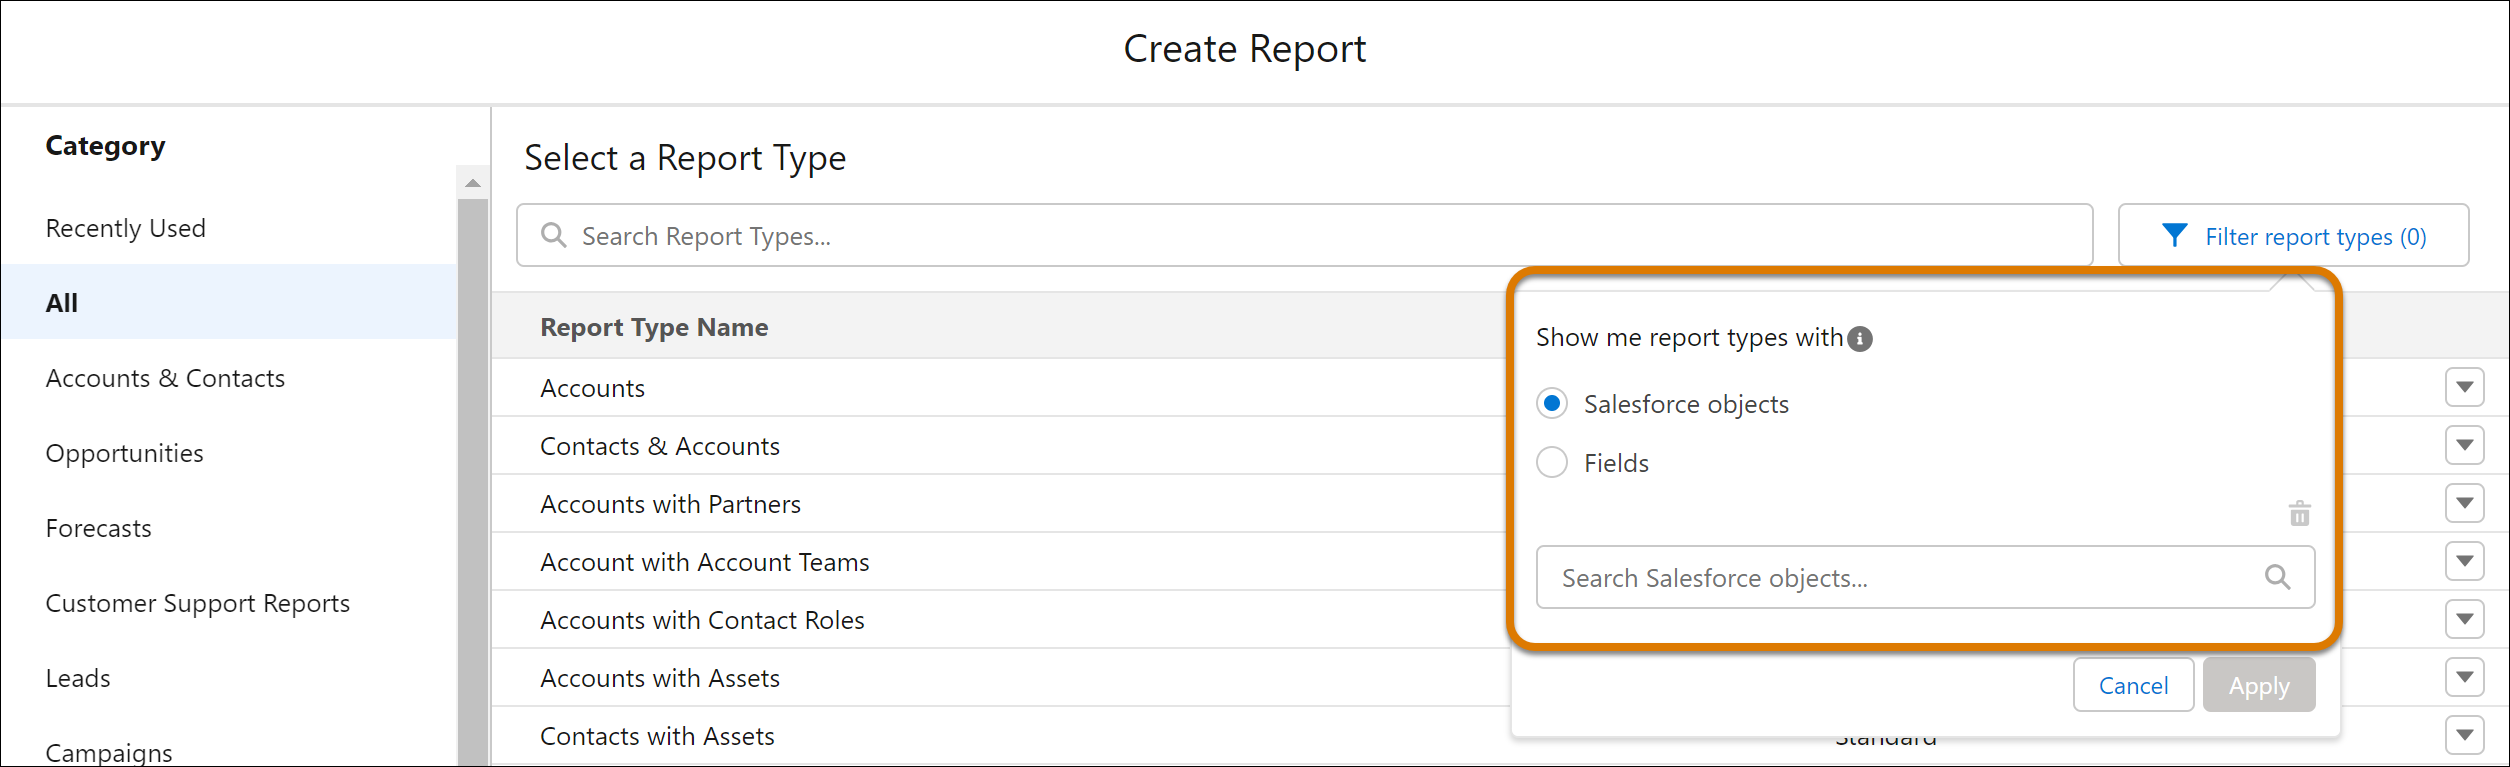 Create Report window showing how to filter by Salesforce object or fields